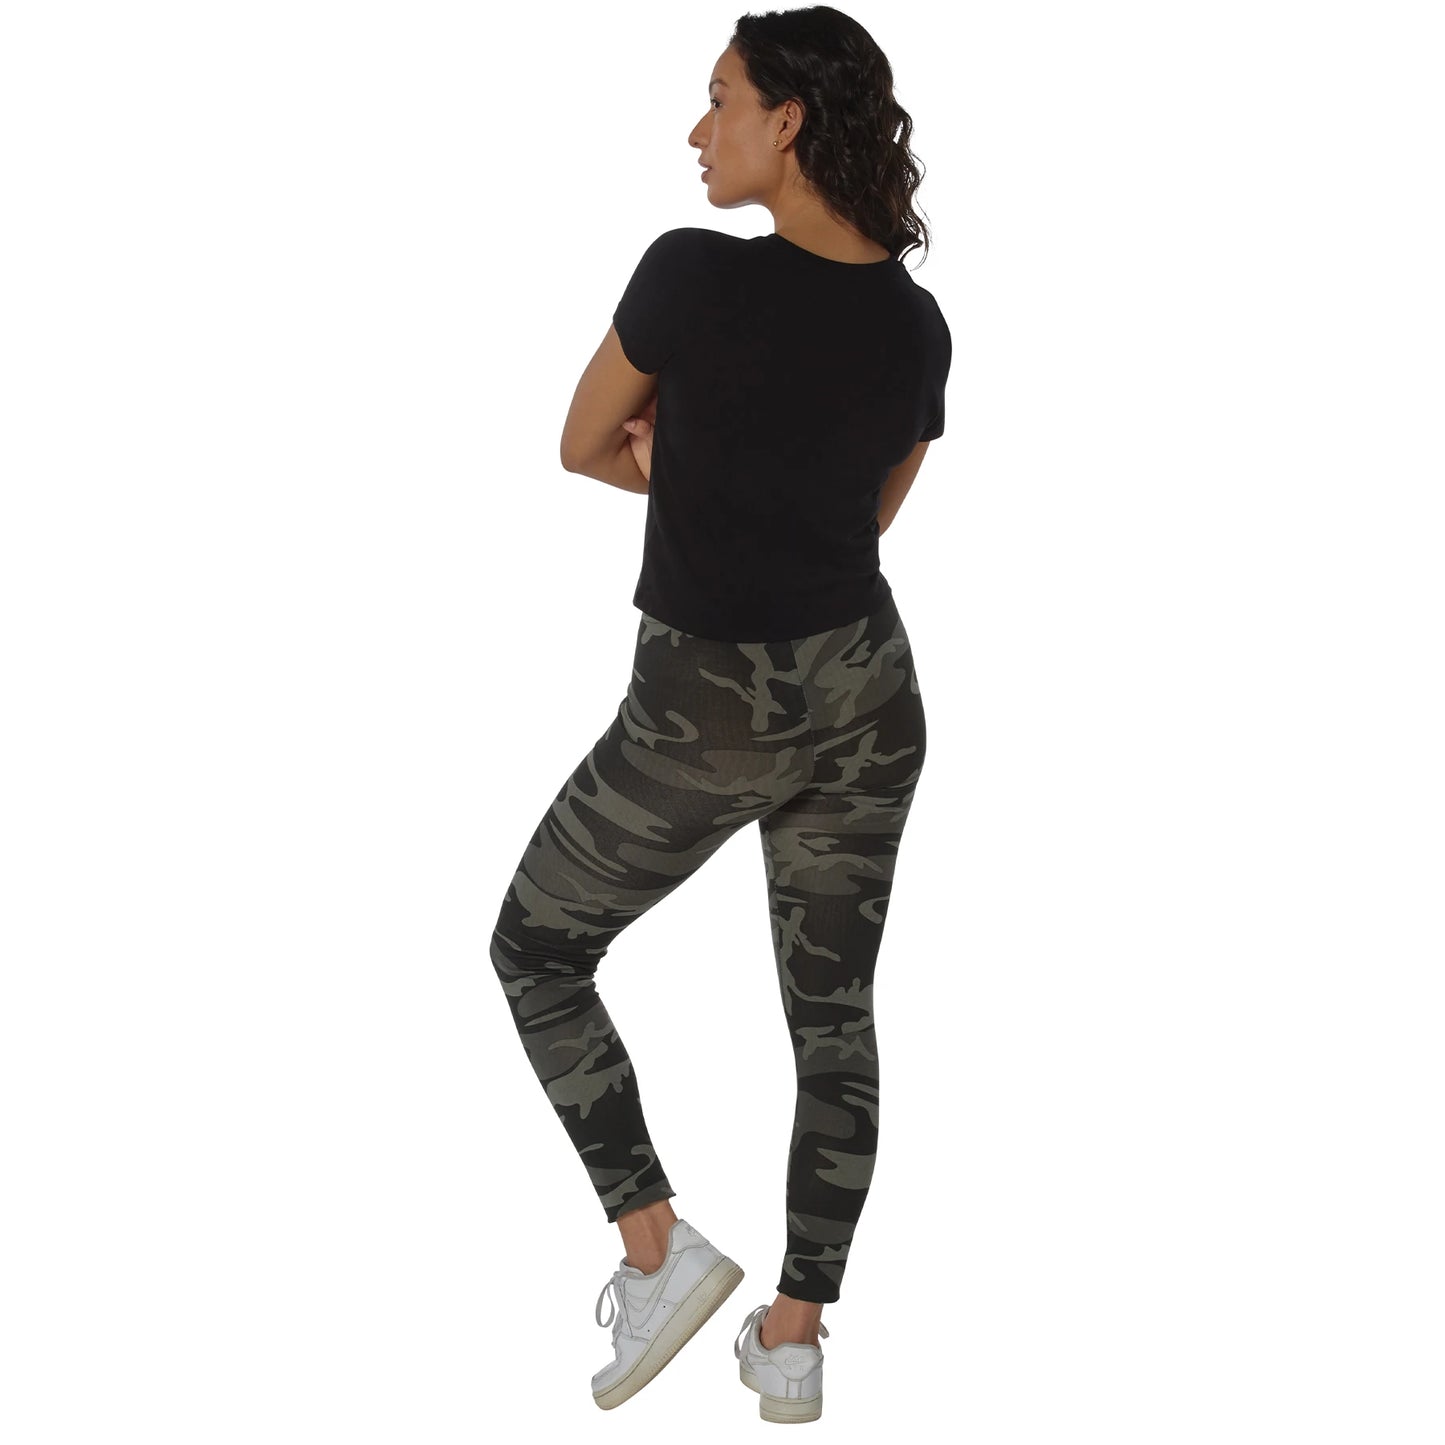 Rothco | Women's Workout Performance Black Camo Leggings with Pockets